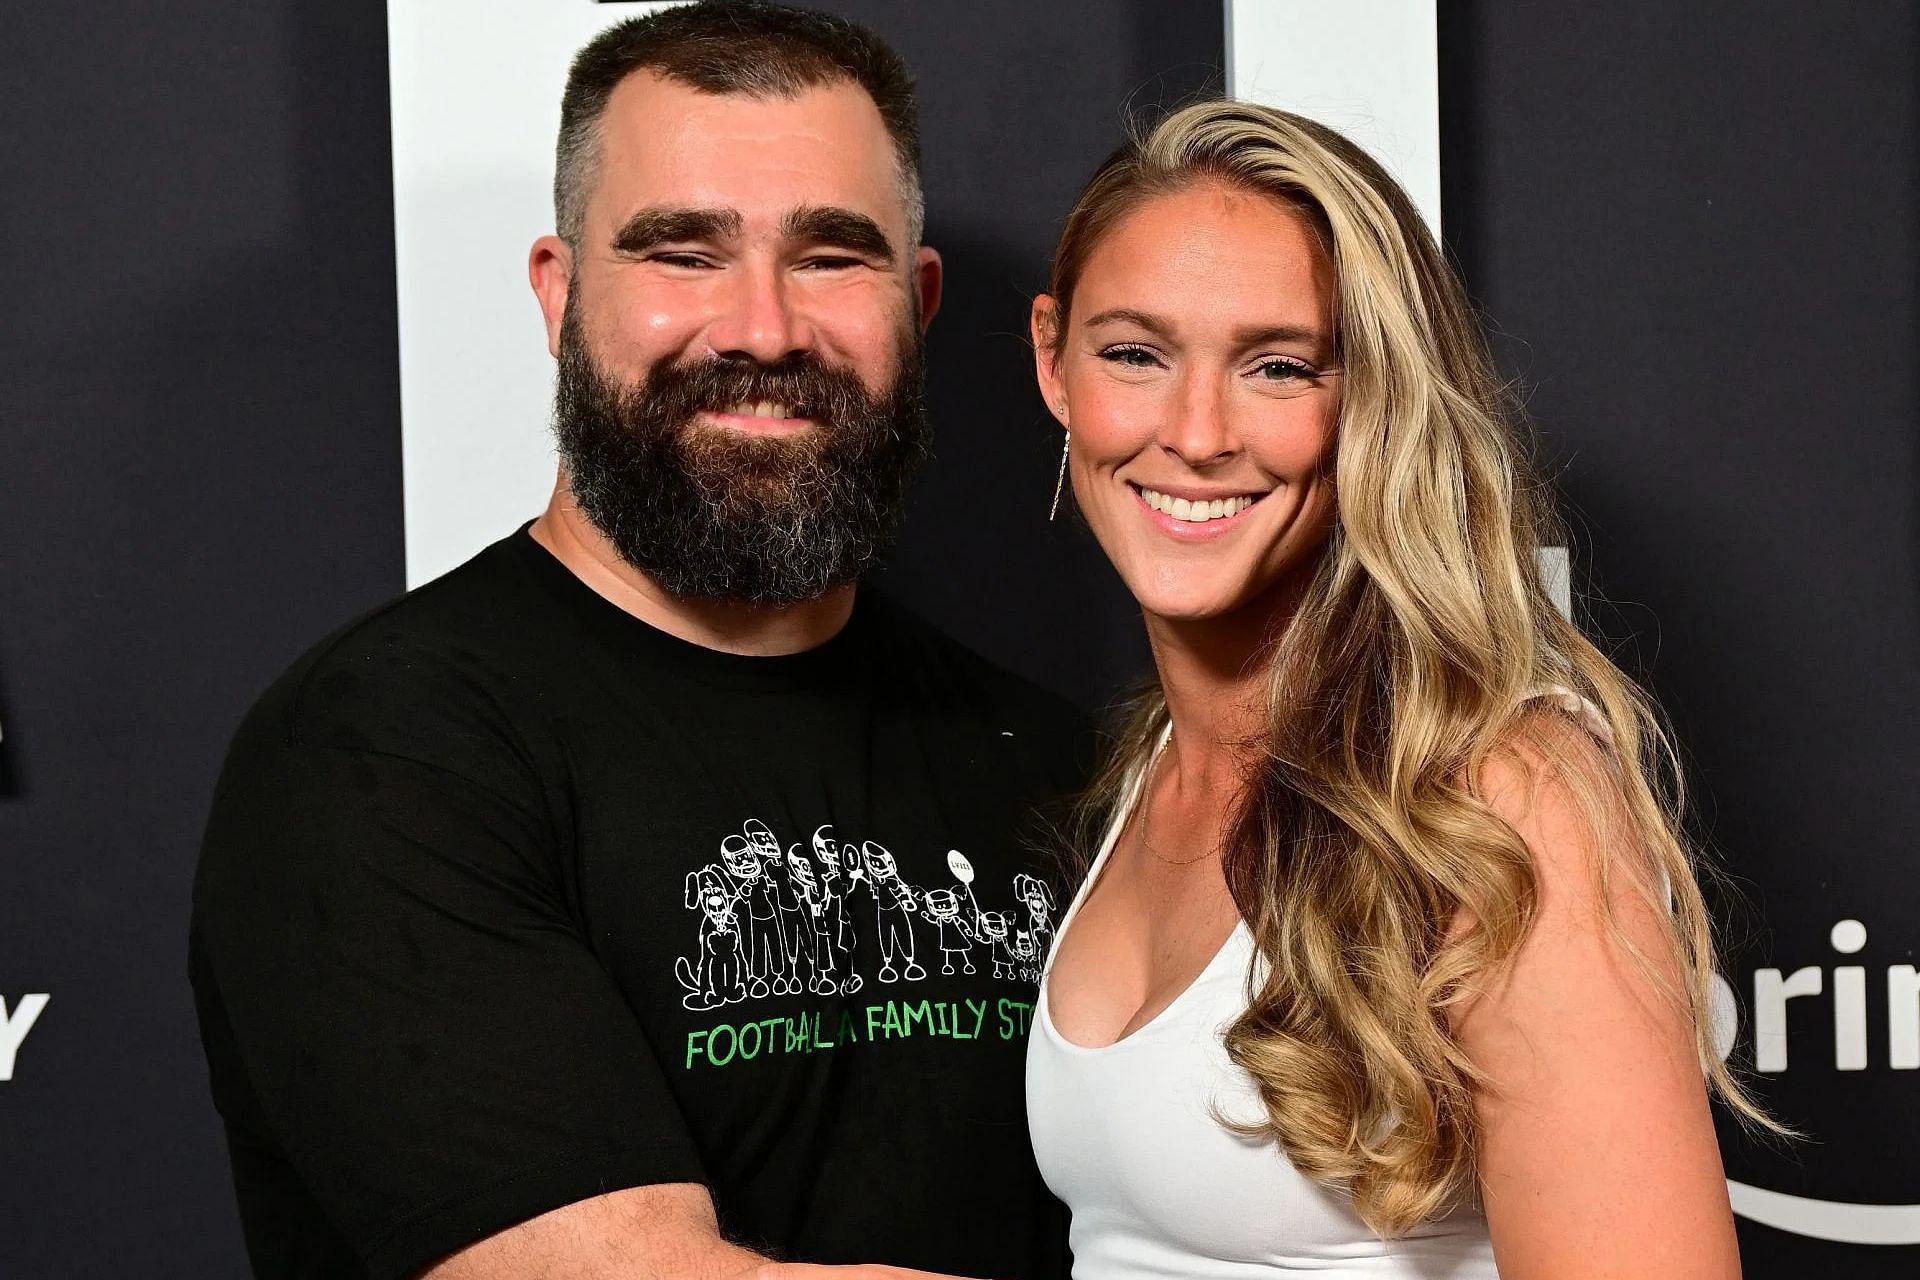 Kylie and Jason Kelce have been married since 2018.